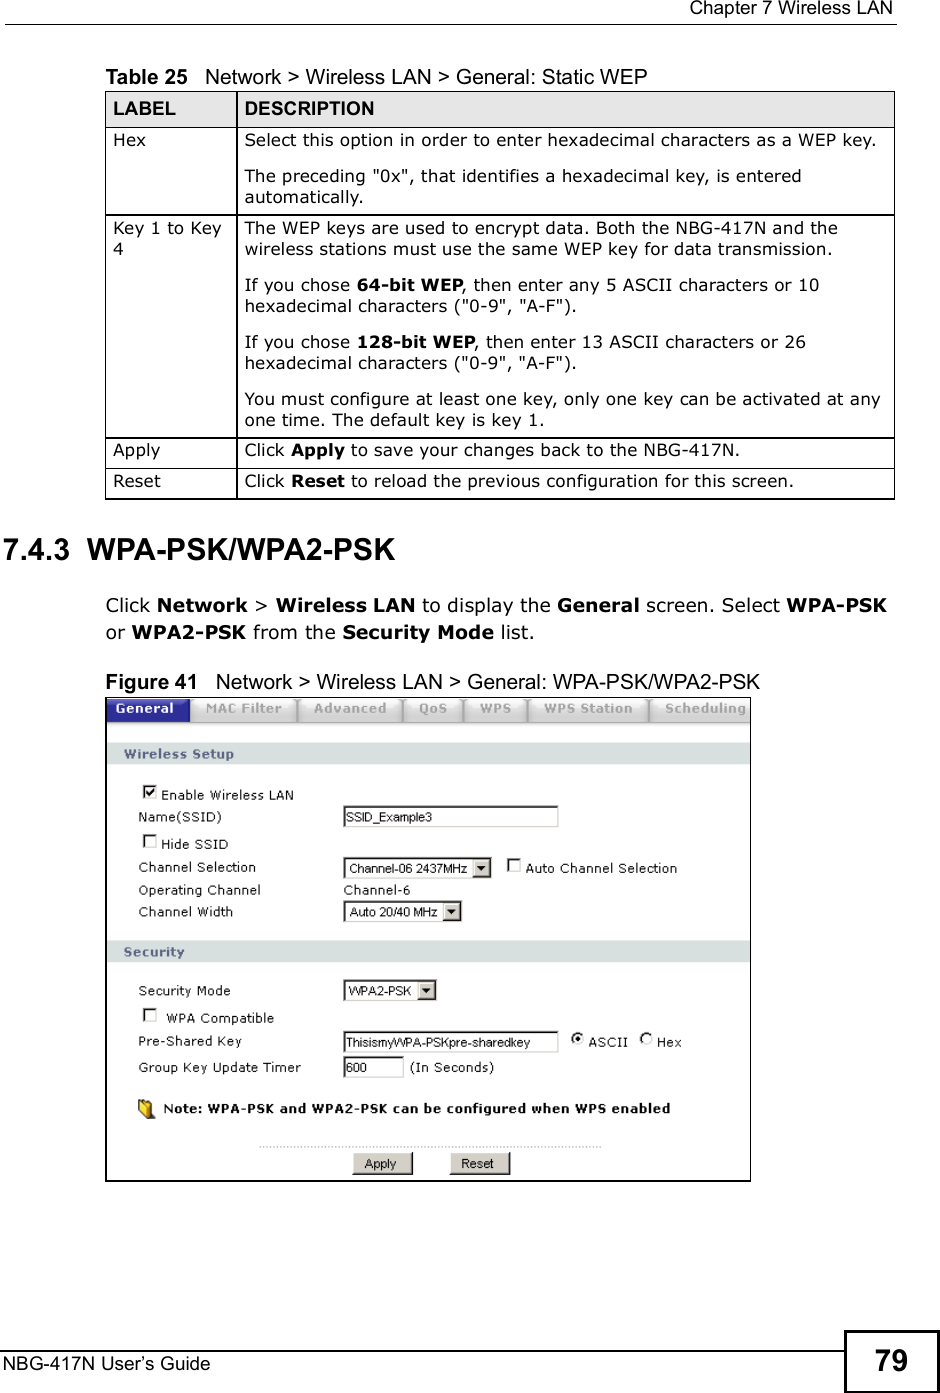  Chapter 7Wireless LANNBG-417N User s Guide 797.4.3  WPA-PSK/WPA2-PSKClick Network &gt; Wireless LAN to display the General screen. Select WPA-PSK or WPA2-PSK from the Security Mode list.Figure 41   Network &gt; Wireless LAN &gt; General: WPA-PSK/WPA2-PSKHex Select this option in order to enter hexadecimal characters as a WEP key. The preceding &quot;0x&quot;, that identifies a hexadecimal key, is entered automatically.Key 1 to Key 4The WEP keys are used to encrypt data. Both the NBG-417N and the wireless stations must use the same WEP key for data transmission.If you chose 64-bit WEP, then enter any 5 ASCII characters or 10 hexadecimal characters (&quot;0-9&quot;, &quot;A-F&quot;).If you chose 128-bit WEP, then enter 13 ASCII characters or 26 hexadecimal characters (&quot;0-9&quot;, &quot;A-F&quot;). You must configure at least one key, only one key can be activated at any one time. The default key is key 1.Apply Click Apply to save your changes back to the NBG-417N.Reset Click Reset to reload the previous configuration for this screen.Table 25   Network &gt; Wireless LAN &gt; General: Static WEPLABEL DESCRIPTION